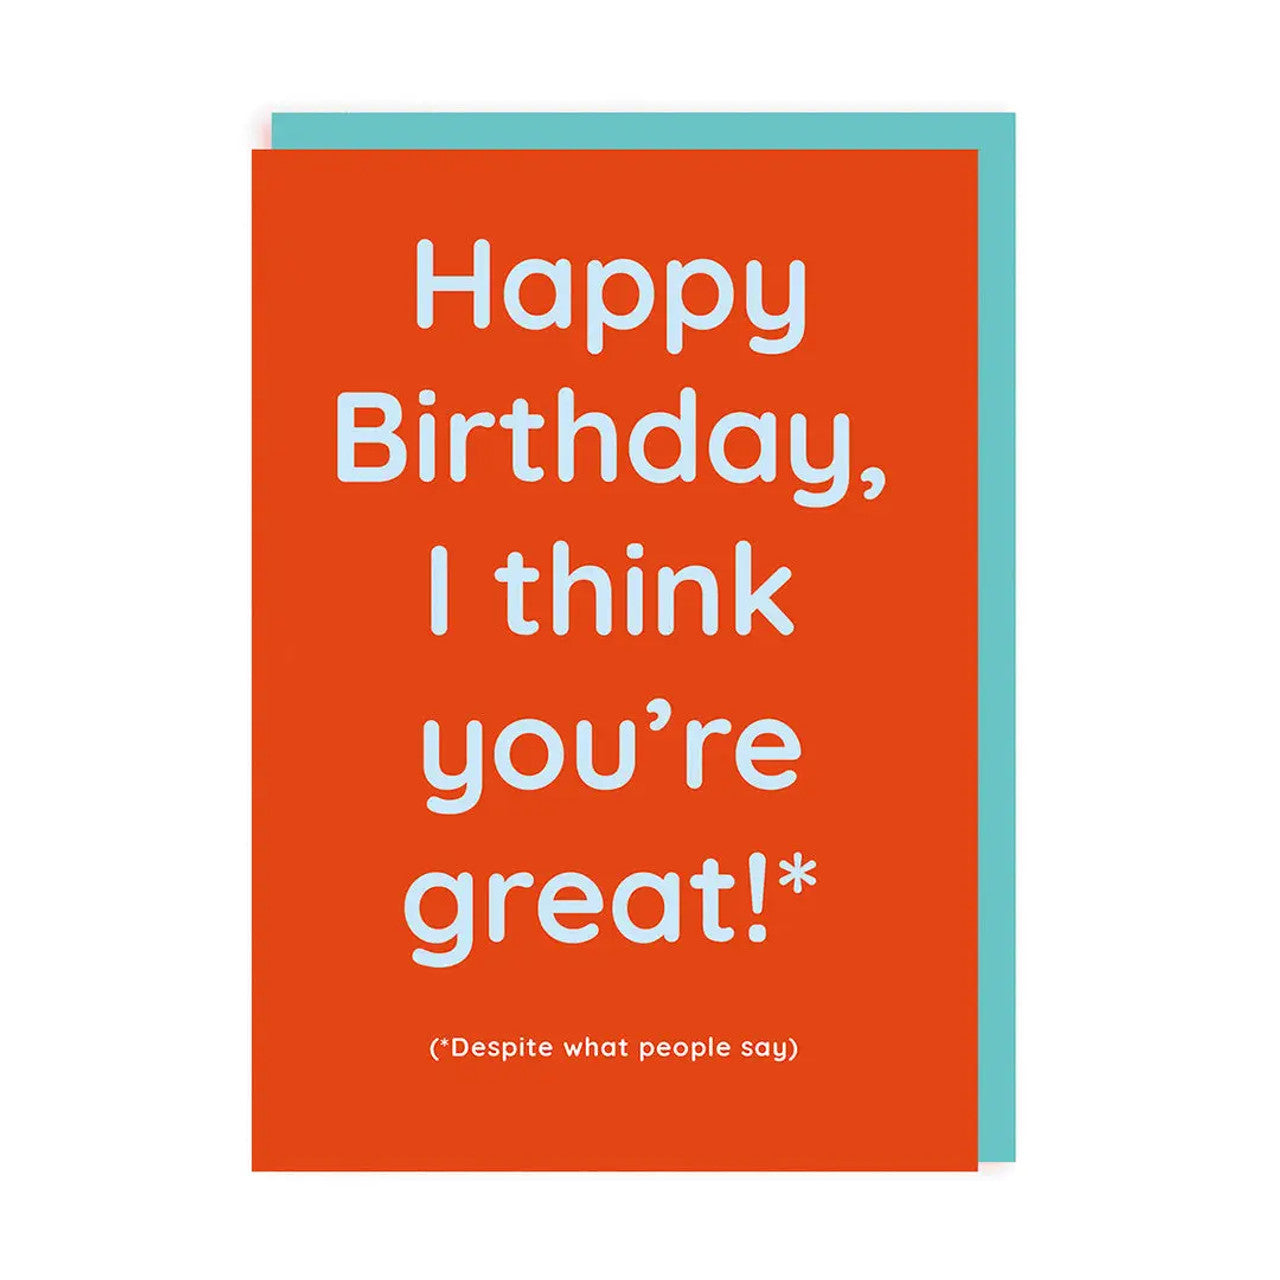 Birthday Card text reads "Happy Birthday, I think you're great!* (*Despite what people say)"